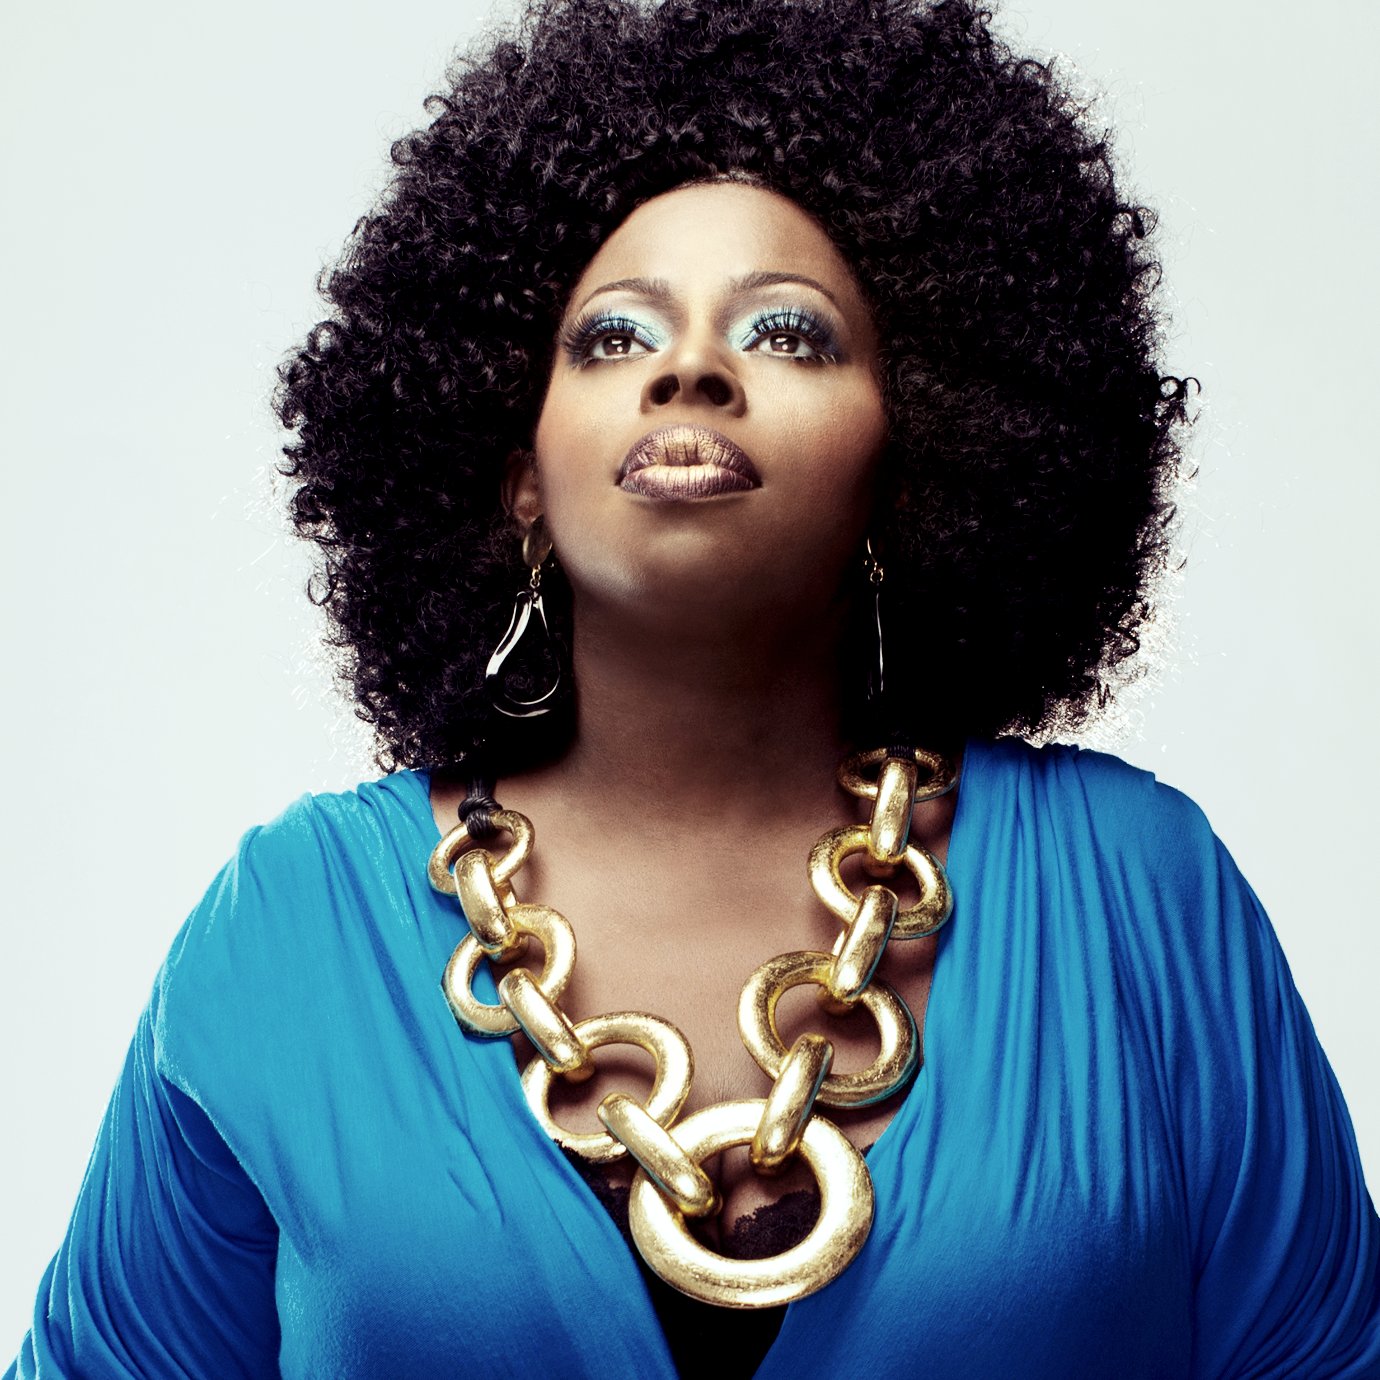 Angie Stone age, hometown, biography | Last.fm